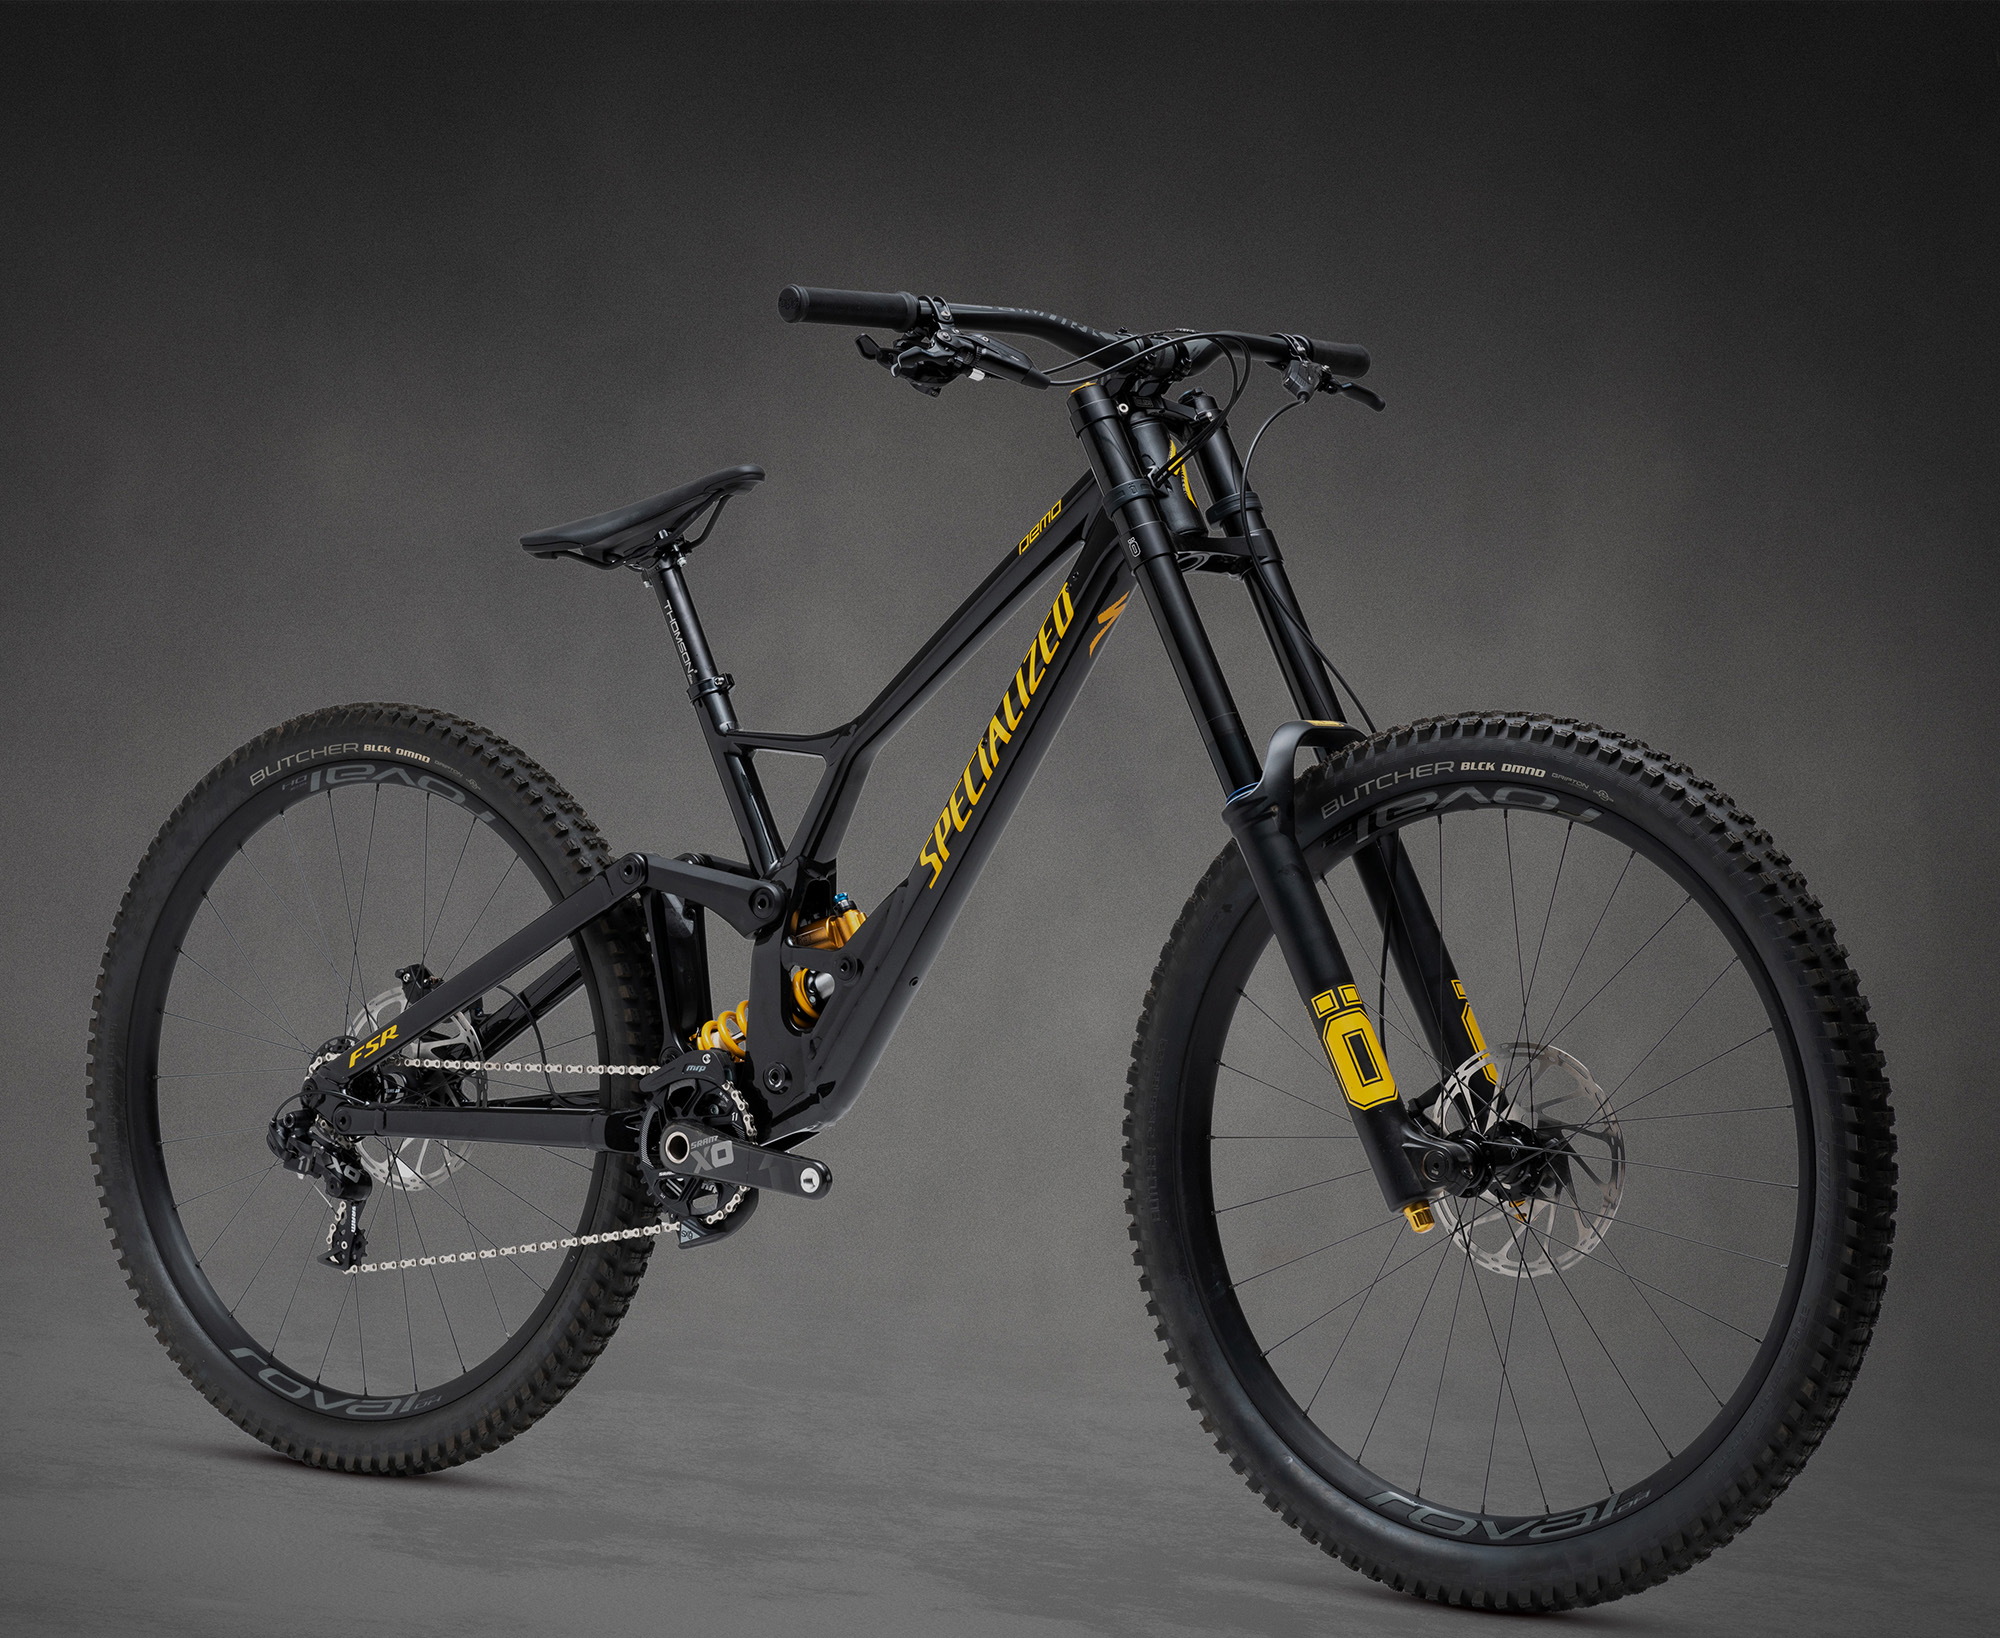 specialized-releases-it-s-full-gas-full-fast-dh-sled-the-demo-29-r